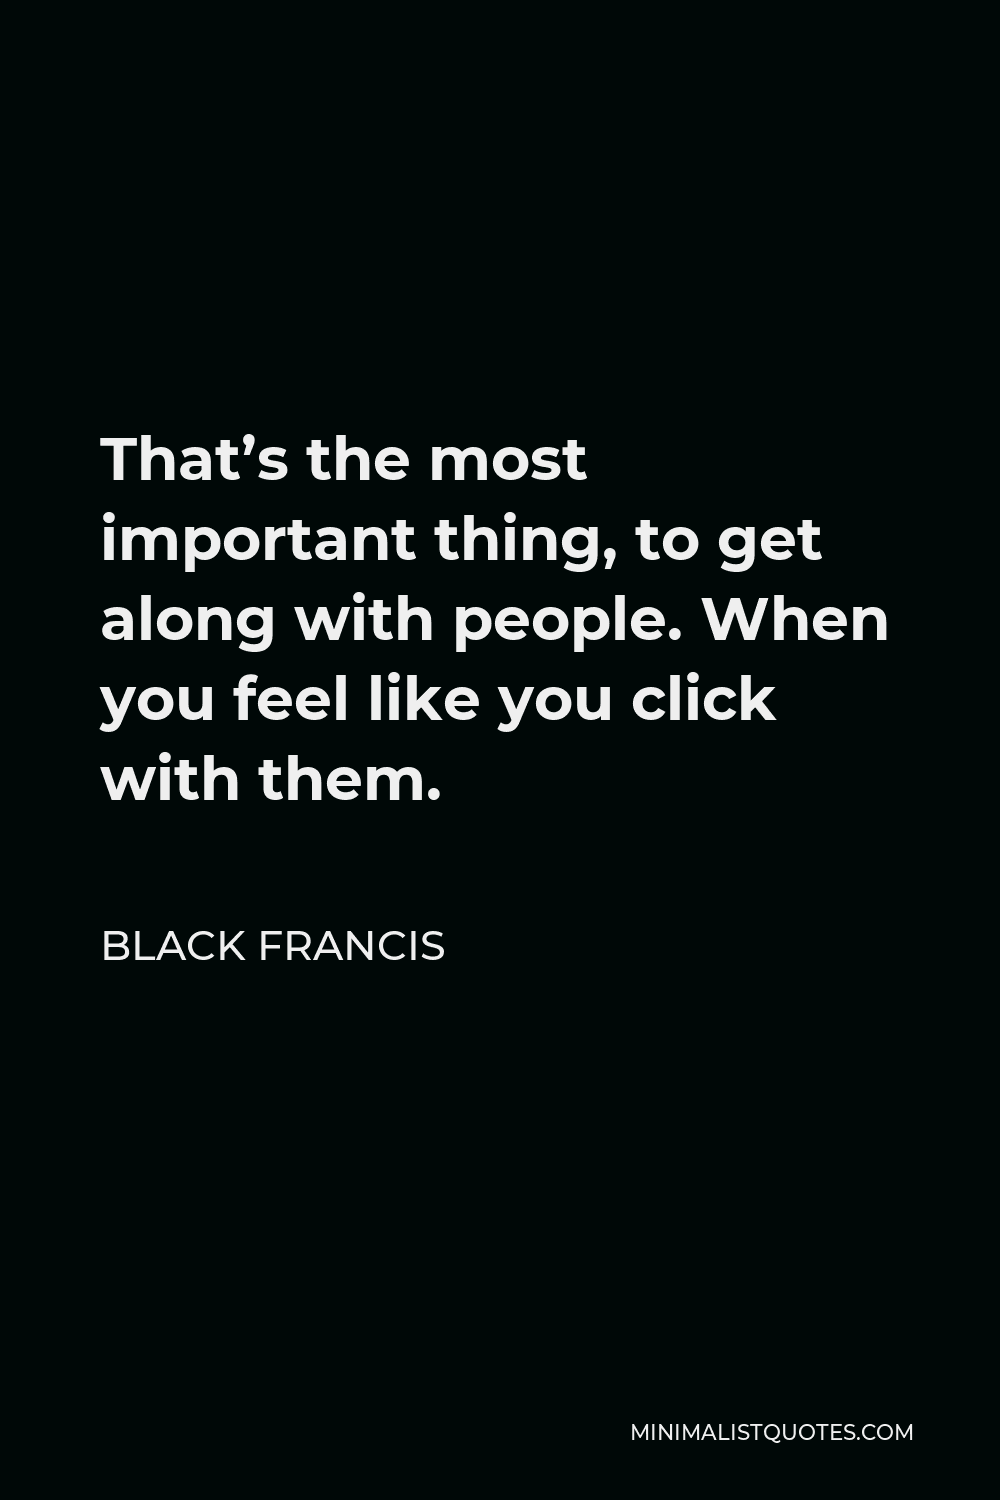 Black Francis Quote - That’s the most important thing, to get along with people. When you feel like you click with them.